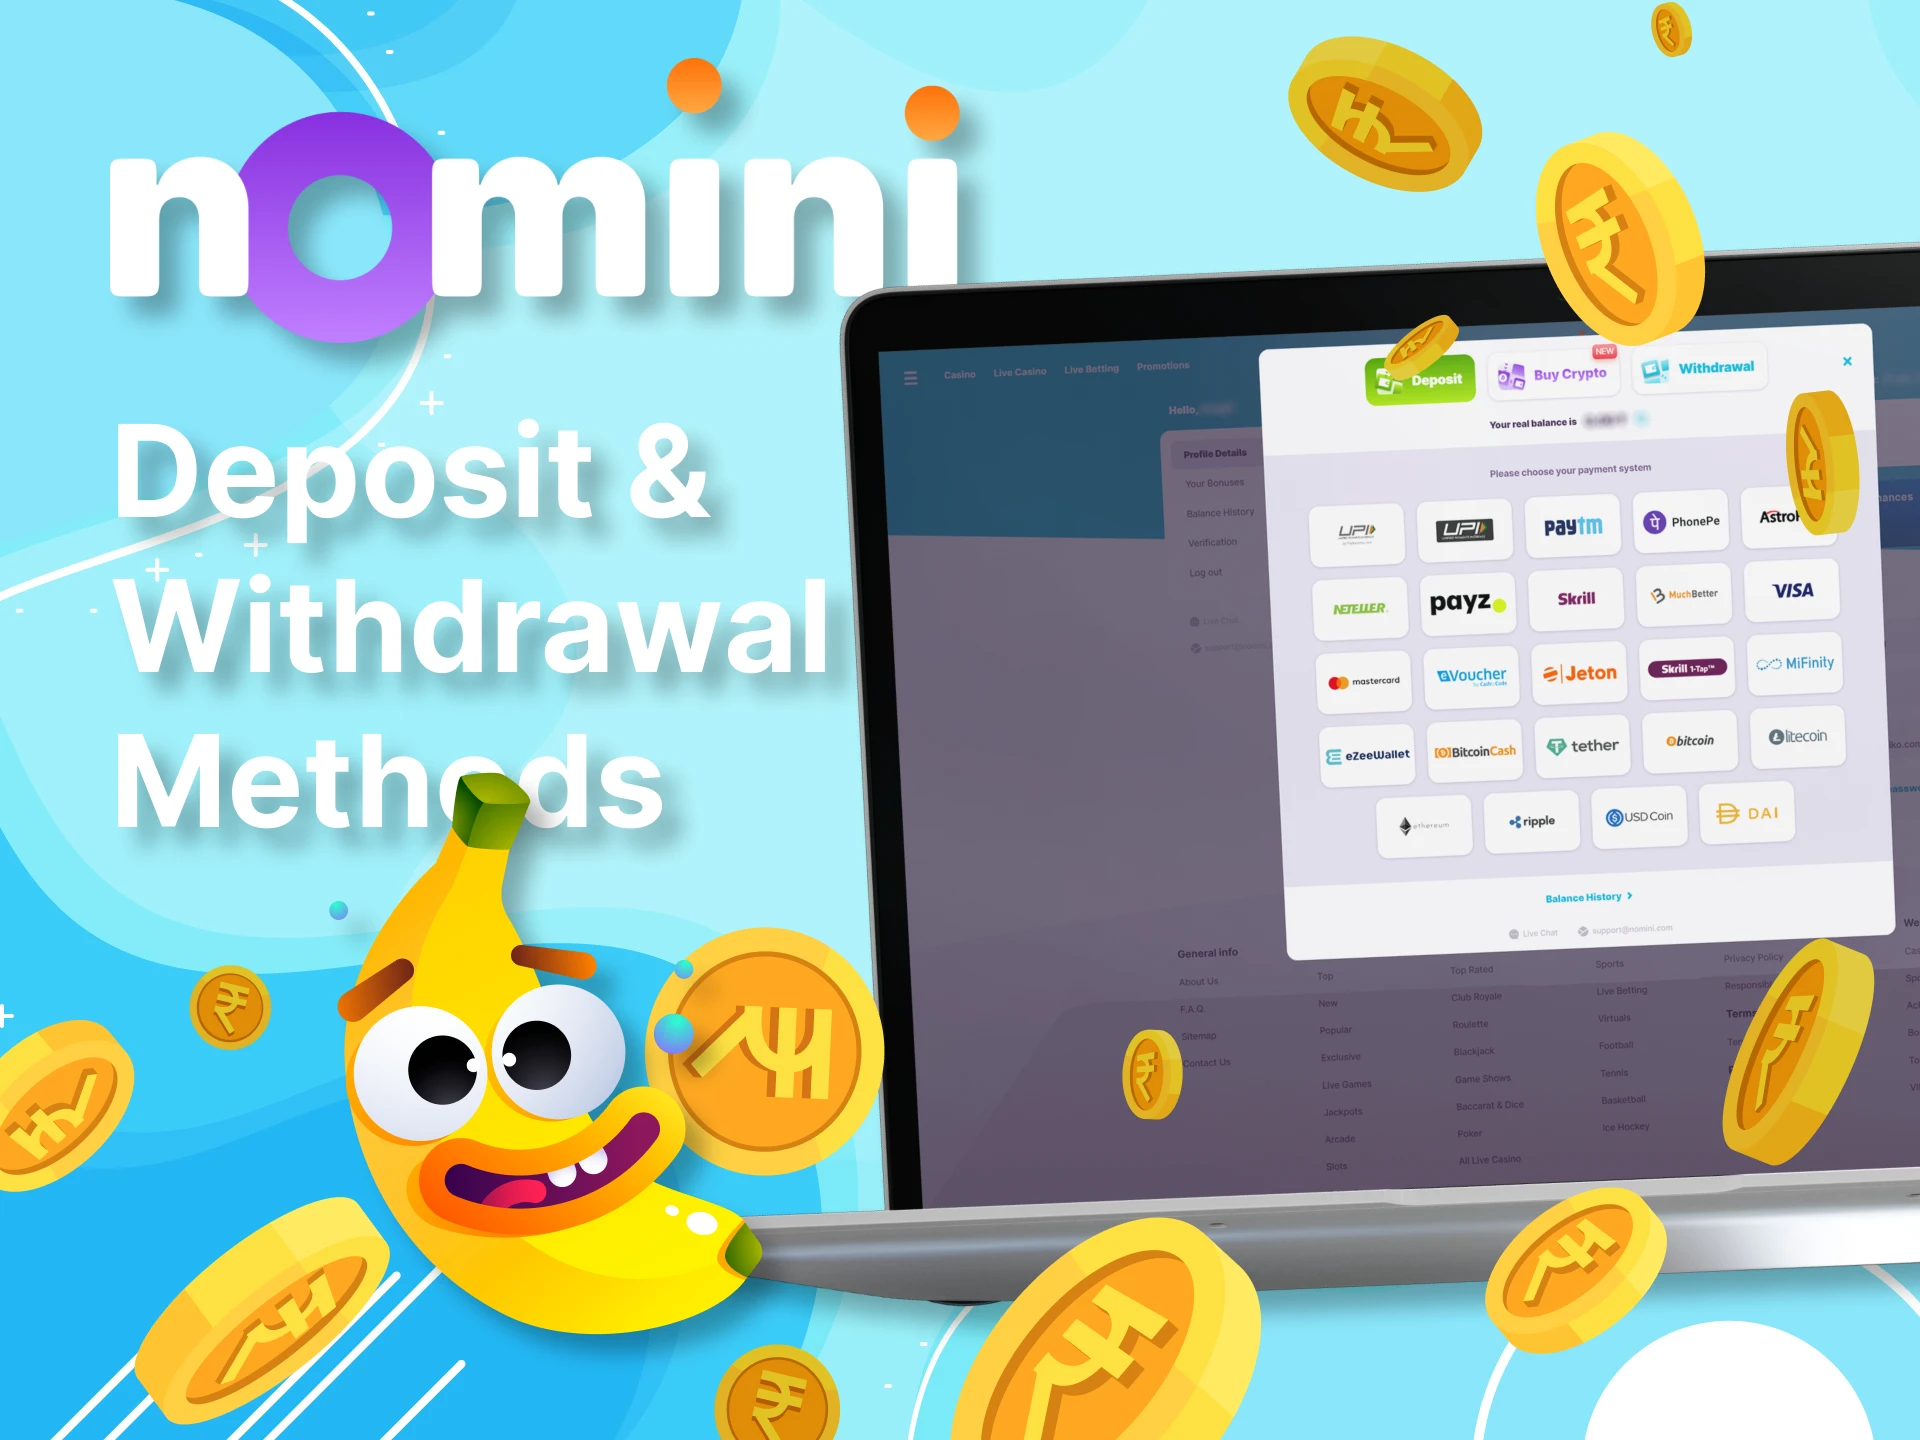 Find out how easy it is to top up your Nomini account and withdraw money.